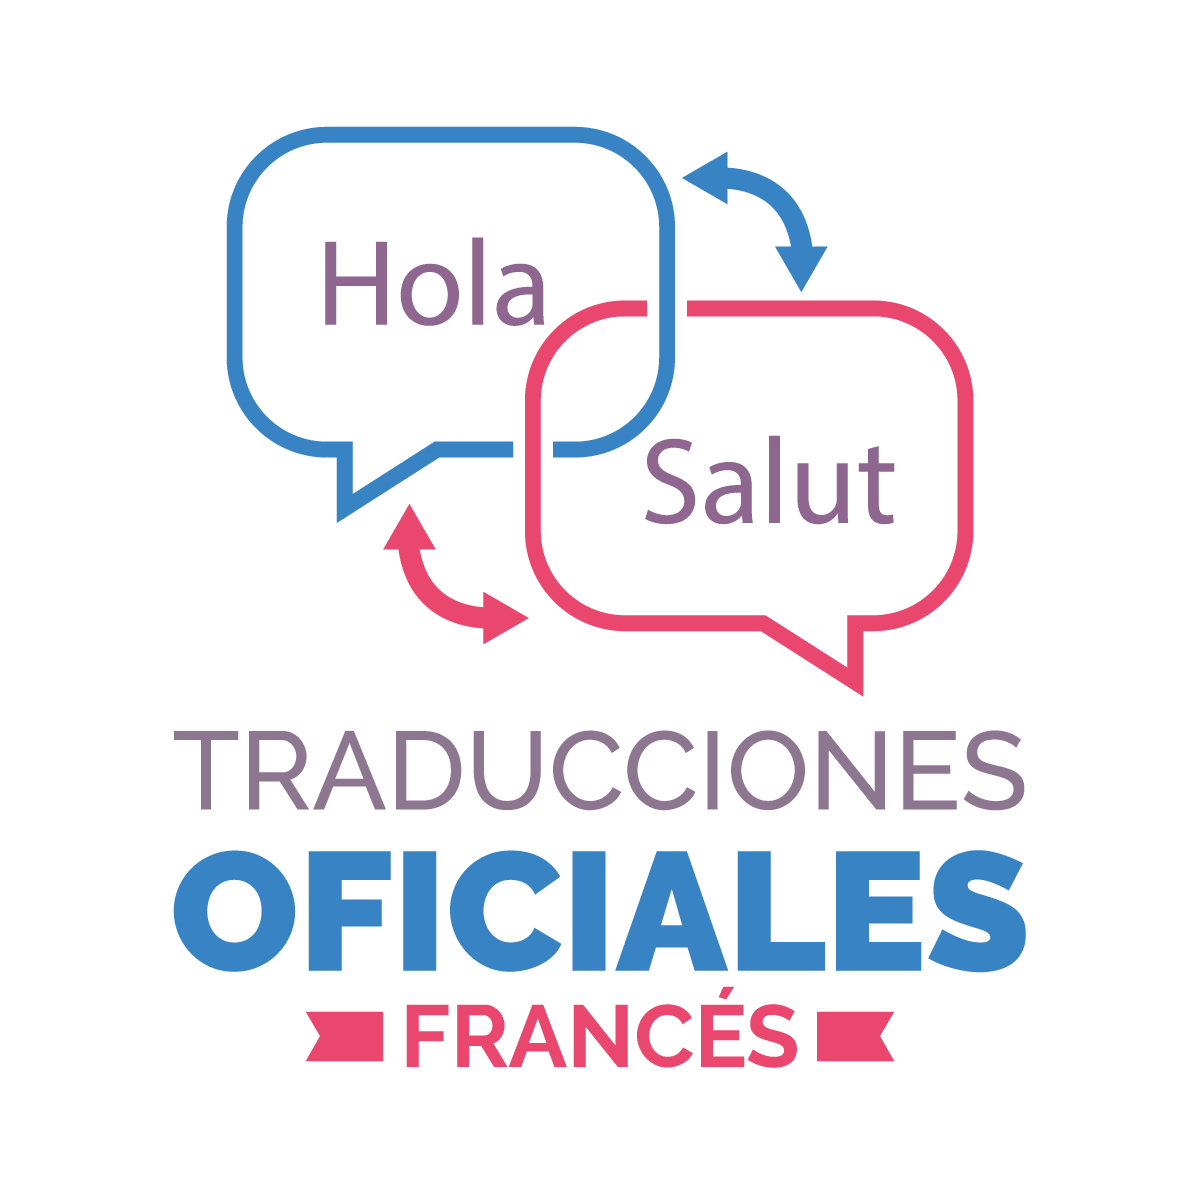 OFFICIAL TRANSLATIONS FROM SPANISH TO FRENCH